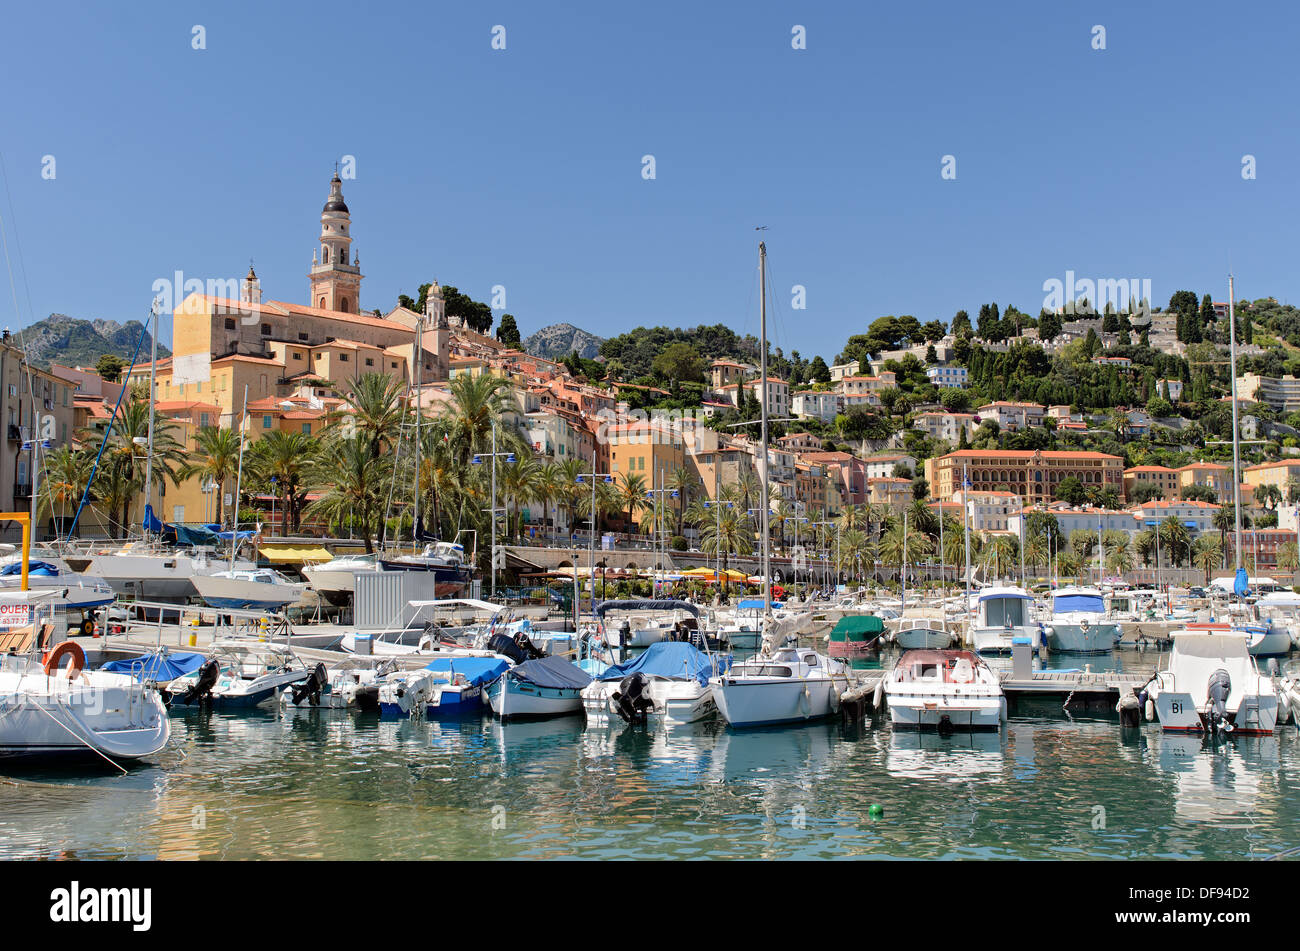 View of the harbour and town of Menton on the Cote d'Azur in France, seen from the marina Stock Photo